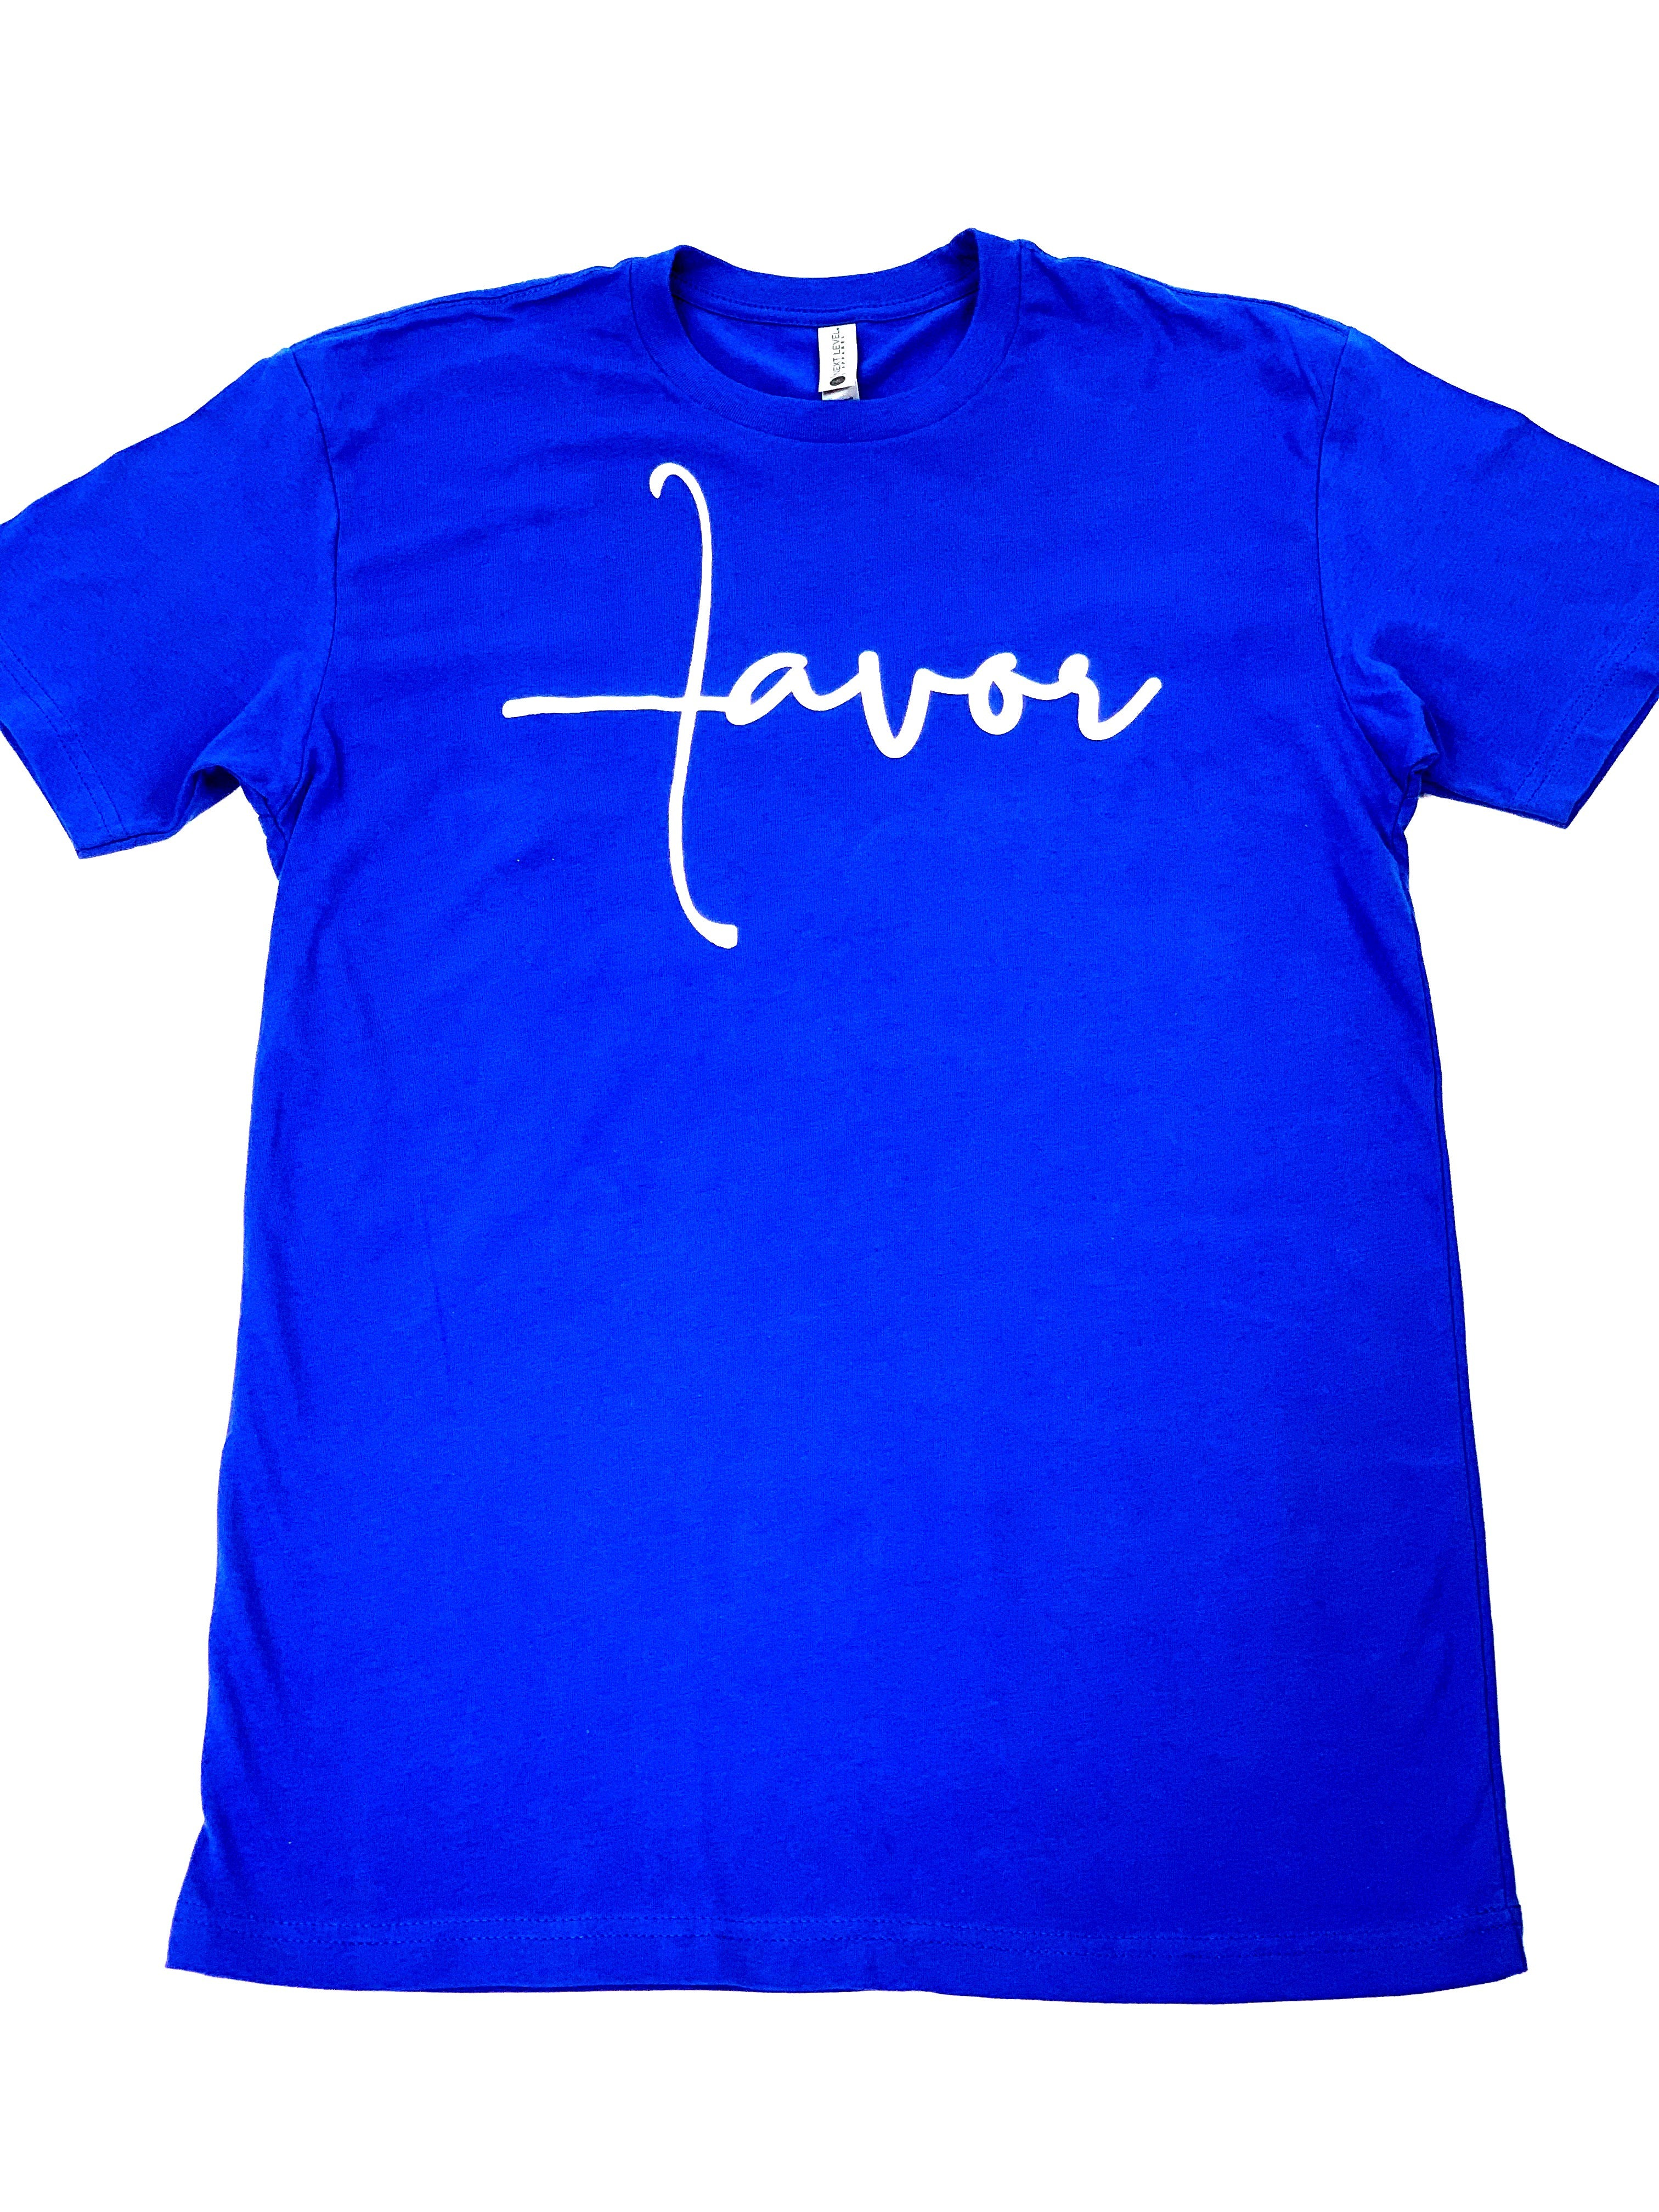 Favor T-Shirt Royal Blue and White - Jewellery Unique Gifts & Accessories